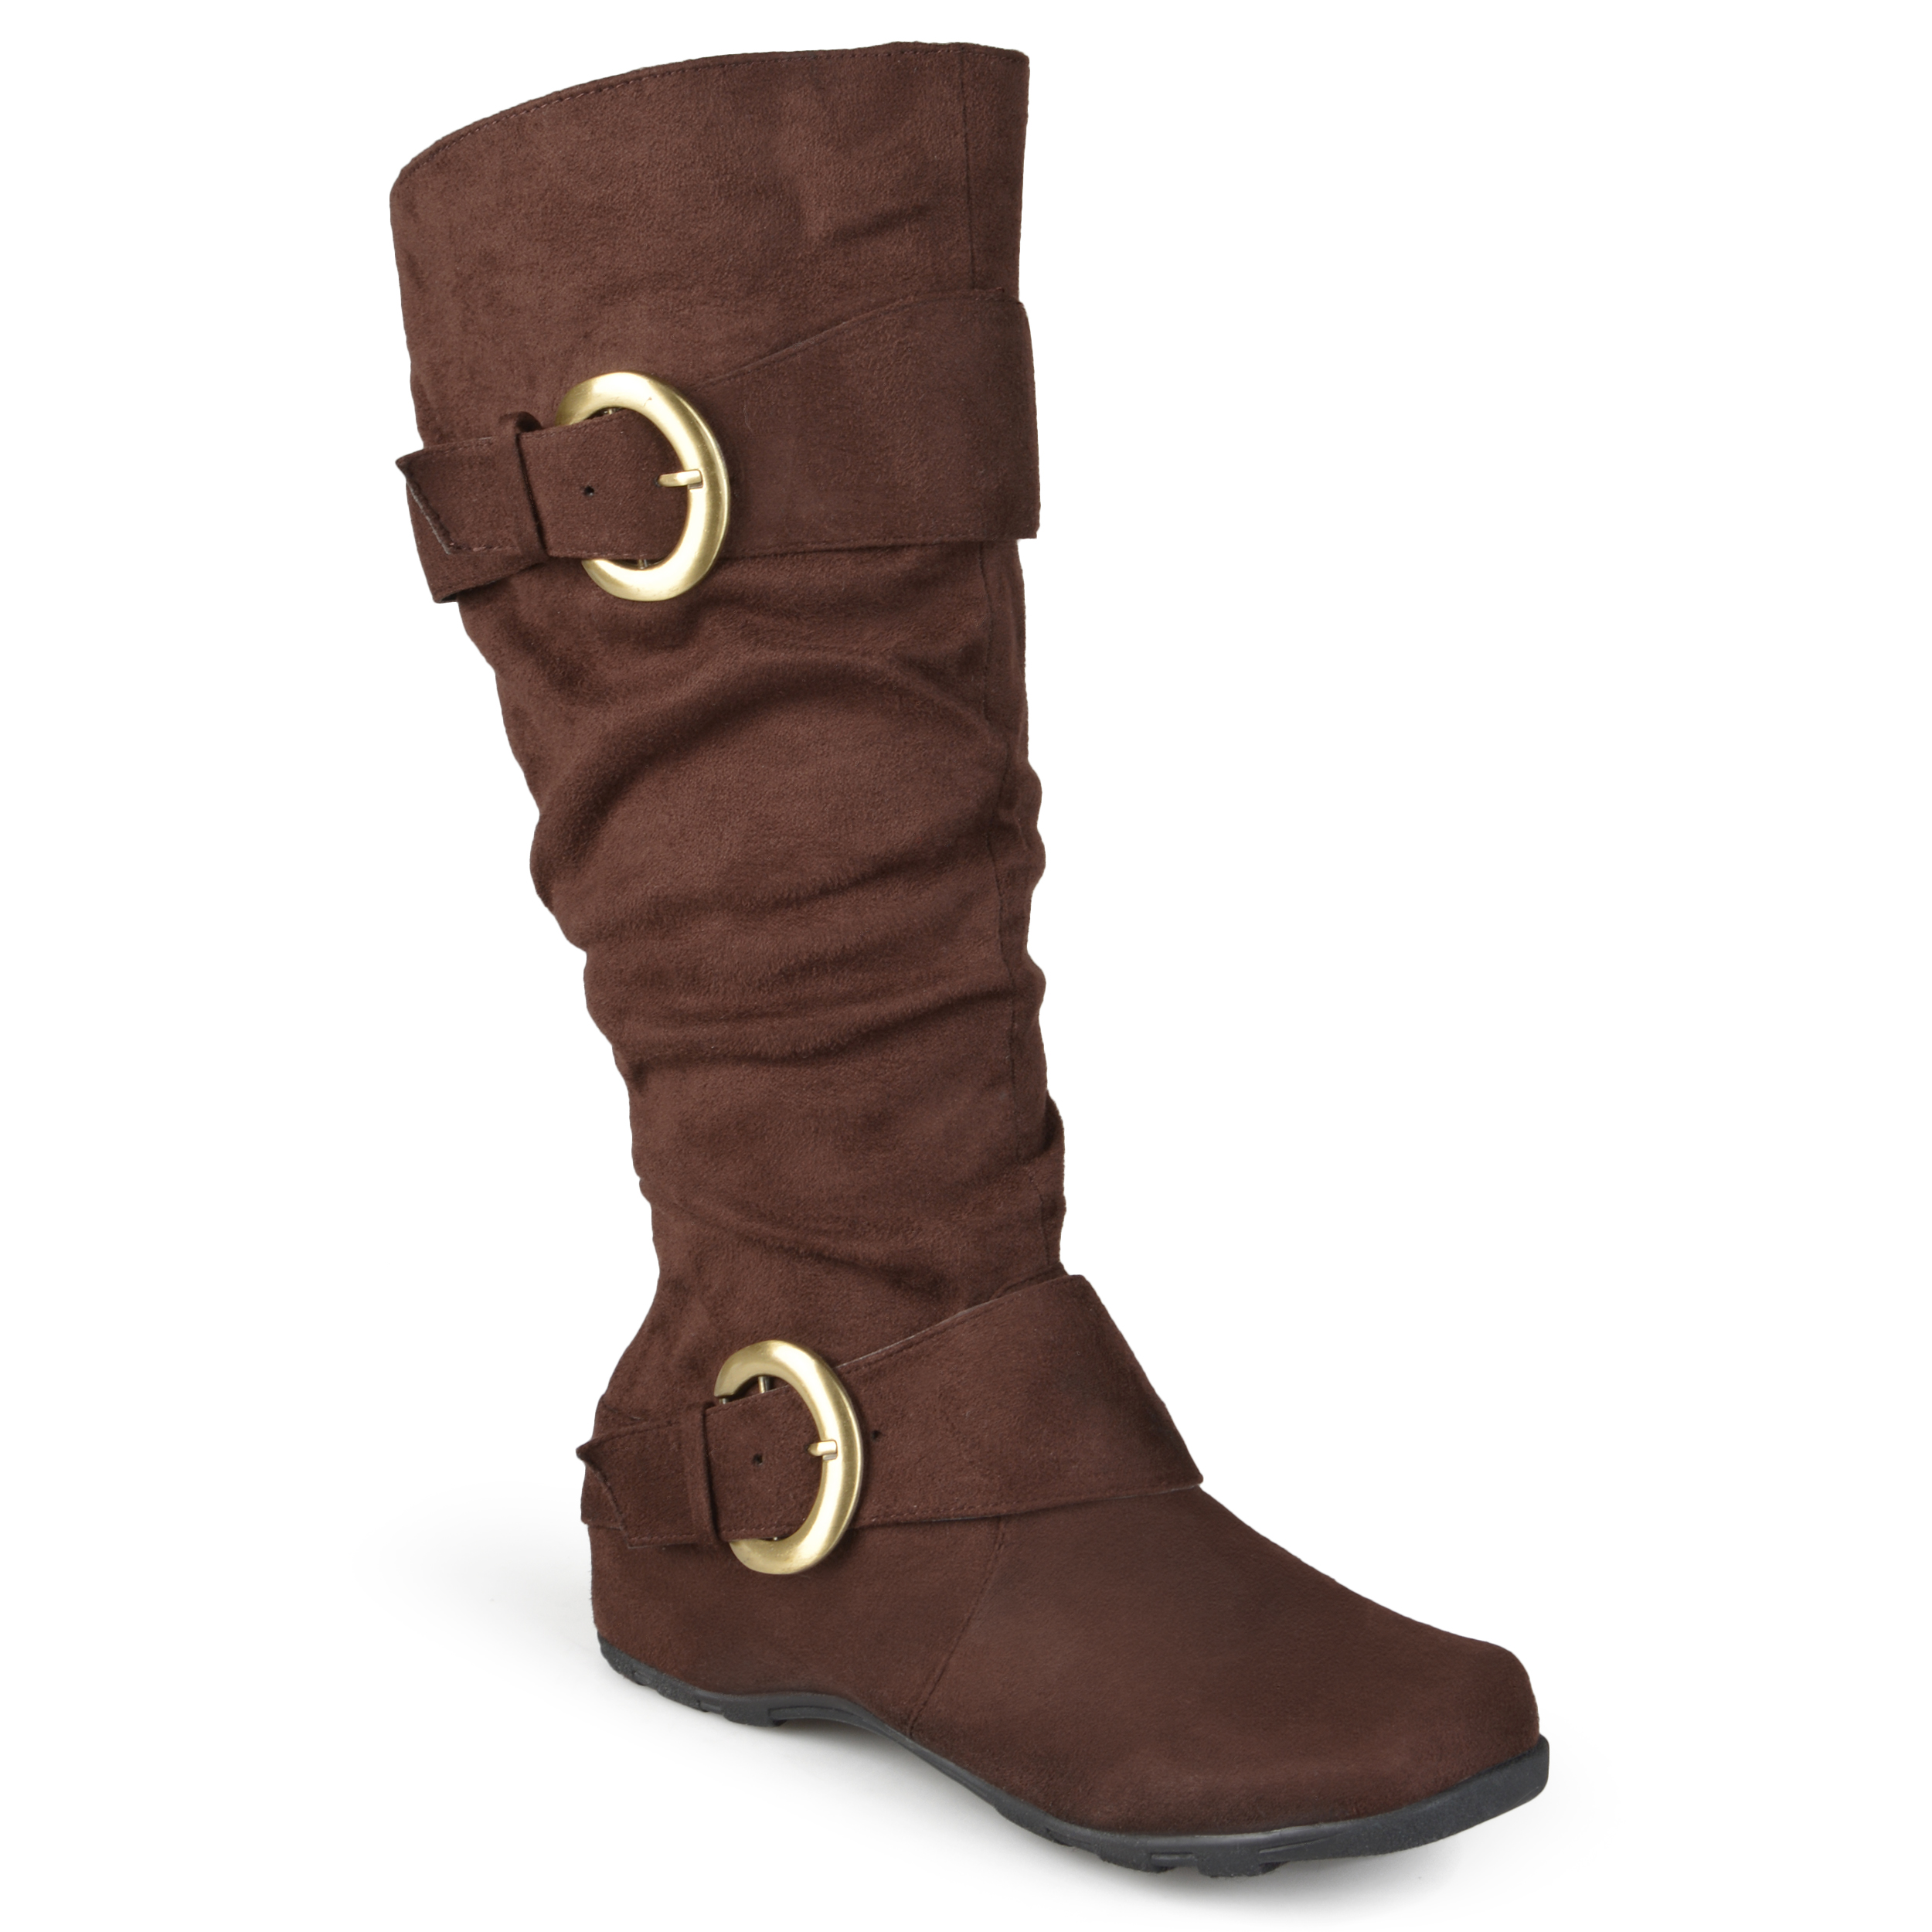 Brinley Co. Women's Extra Wide Calf Mid-Calf Slouch Riding Boots - image 1 of 8